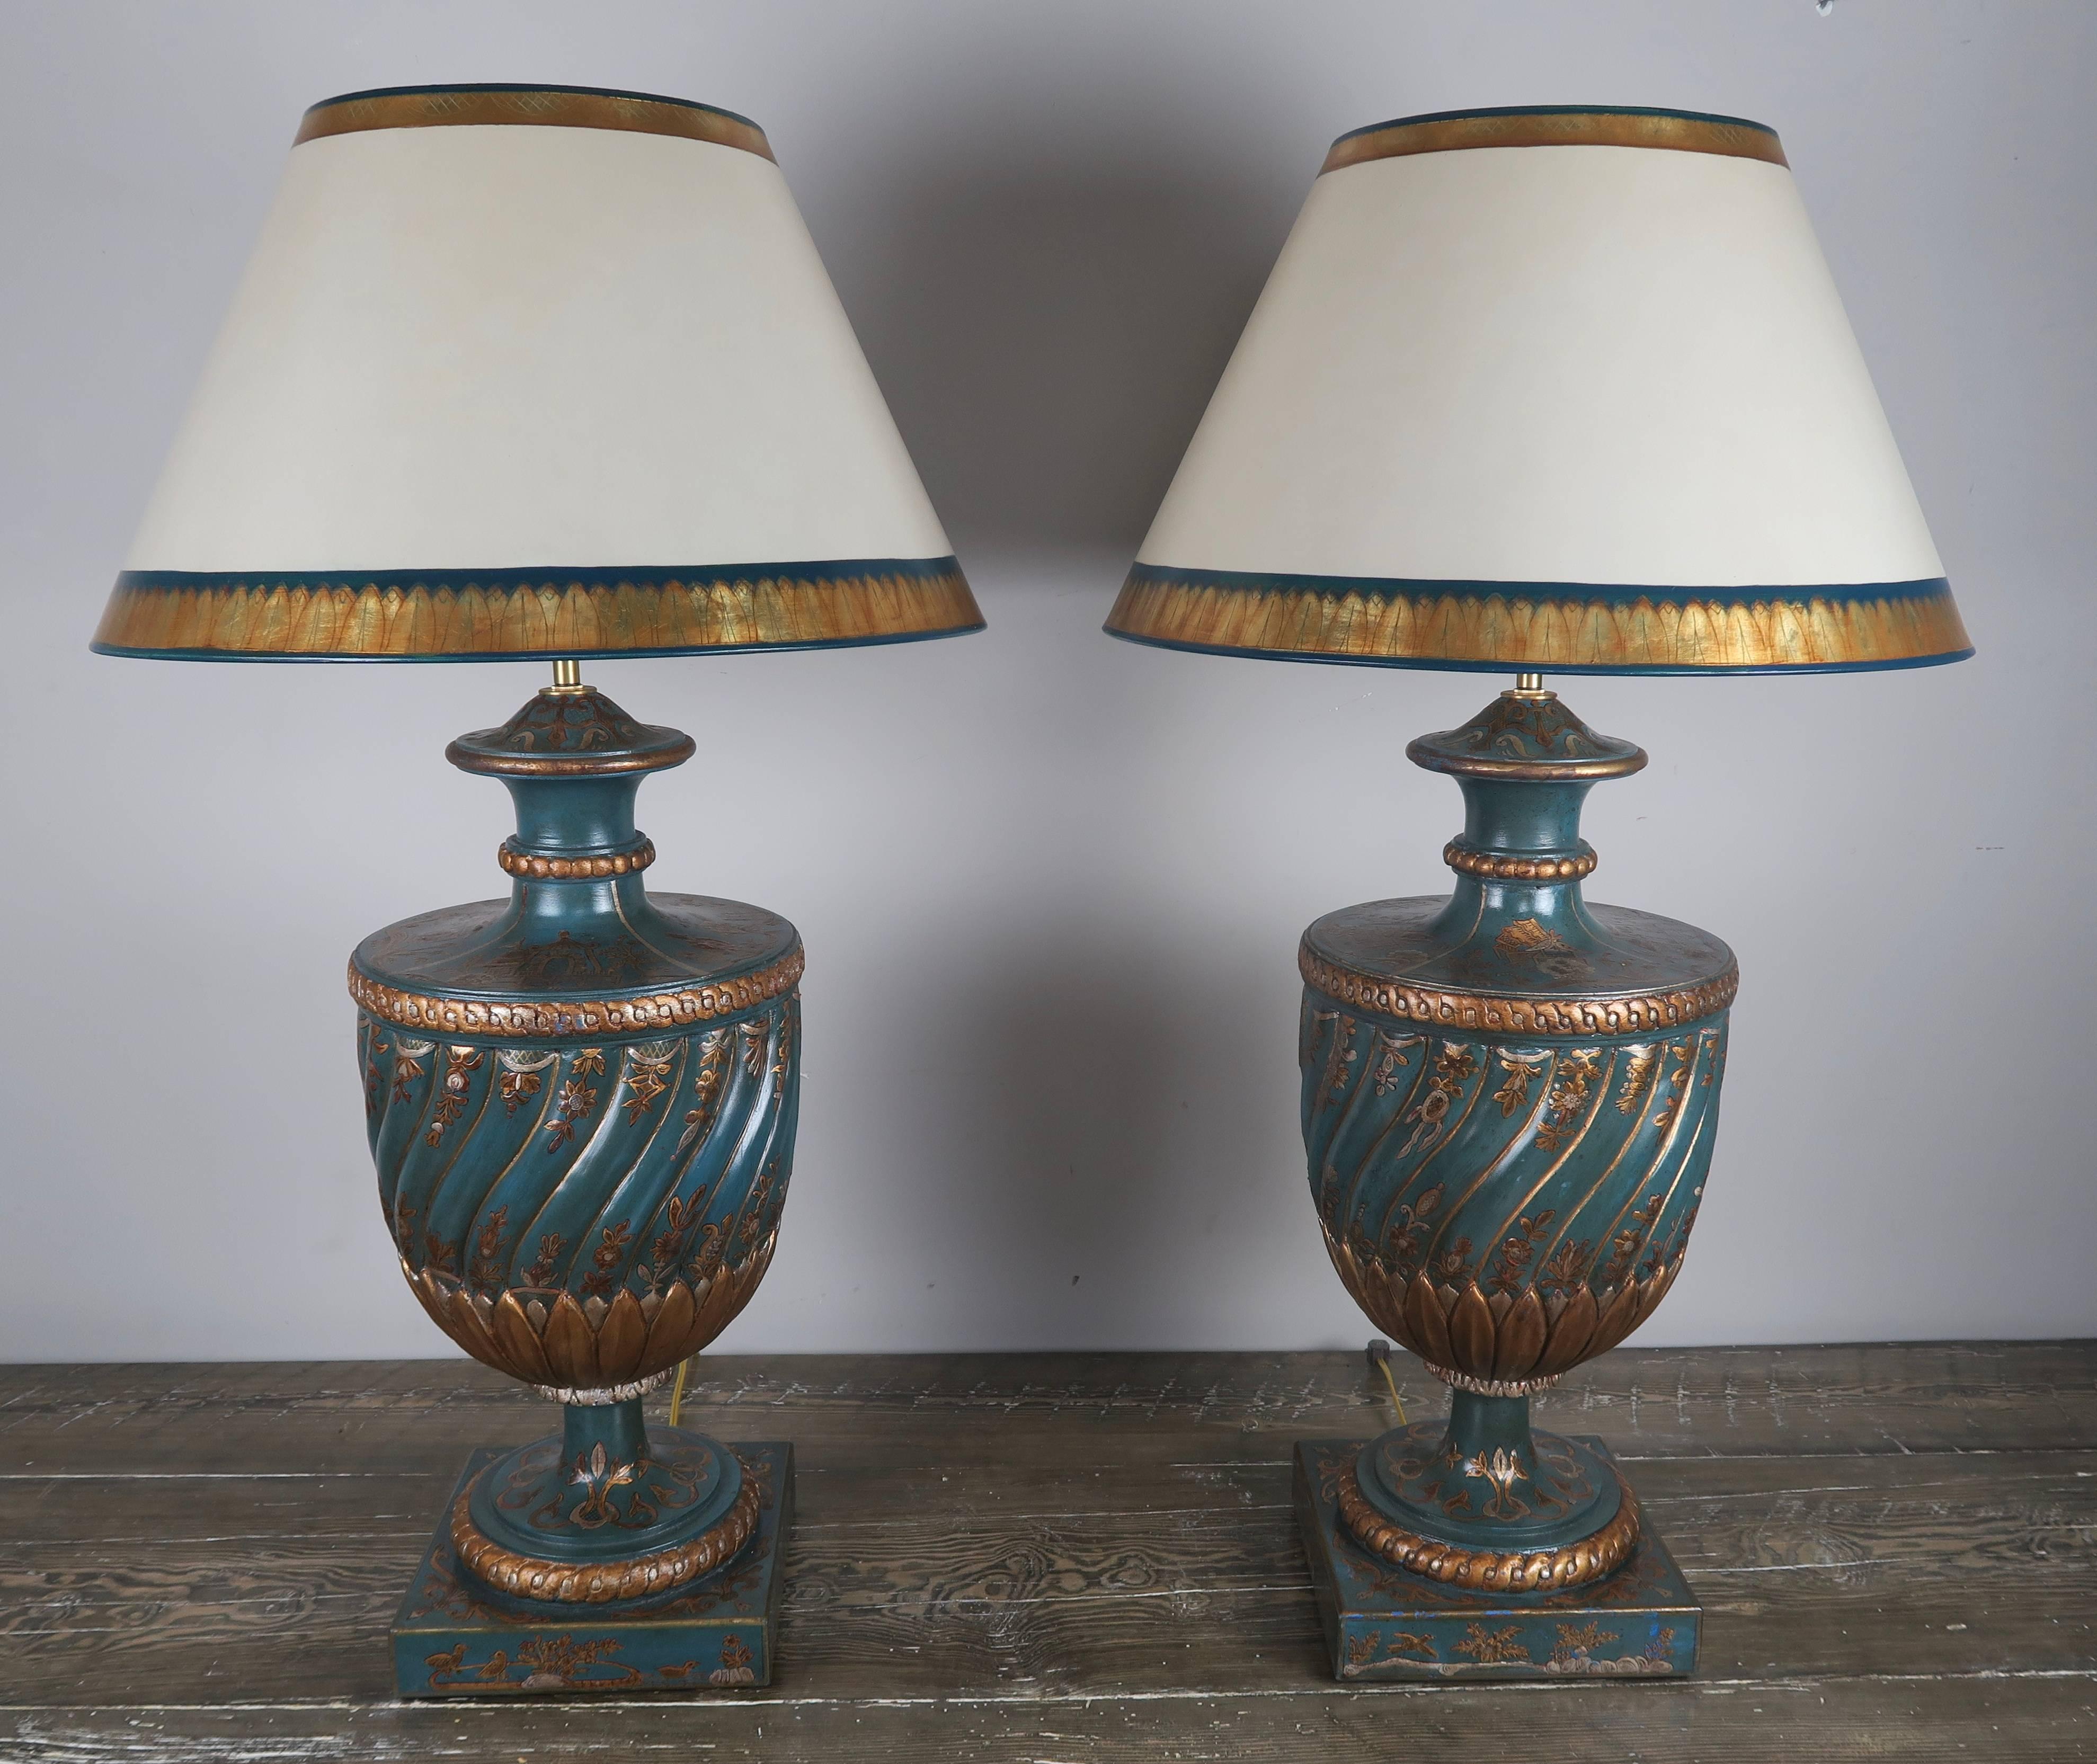 Pair of teal and raised gold chinoiserie decorated urn lamps that have been crowned with hand-painted parchment shades. The lamps are newly wired and are in working condition with two standard sockets each lamp. 


Shade size: 10